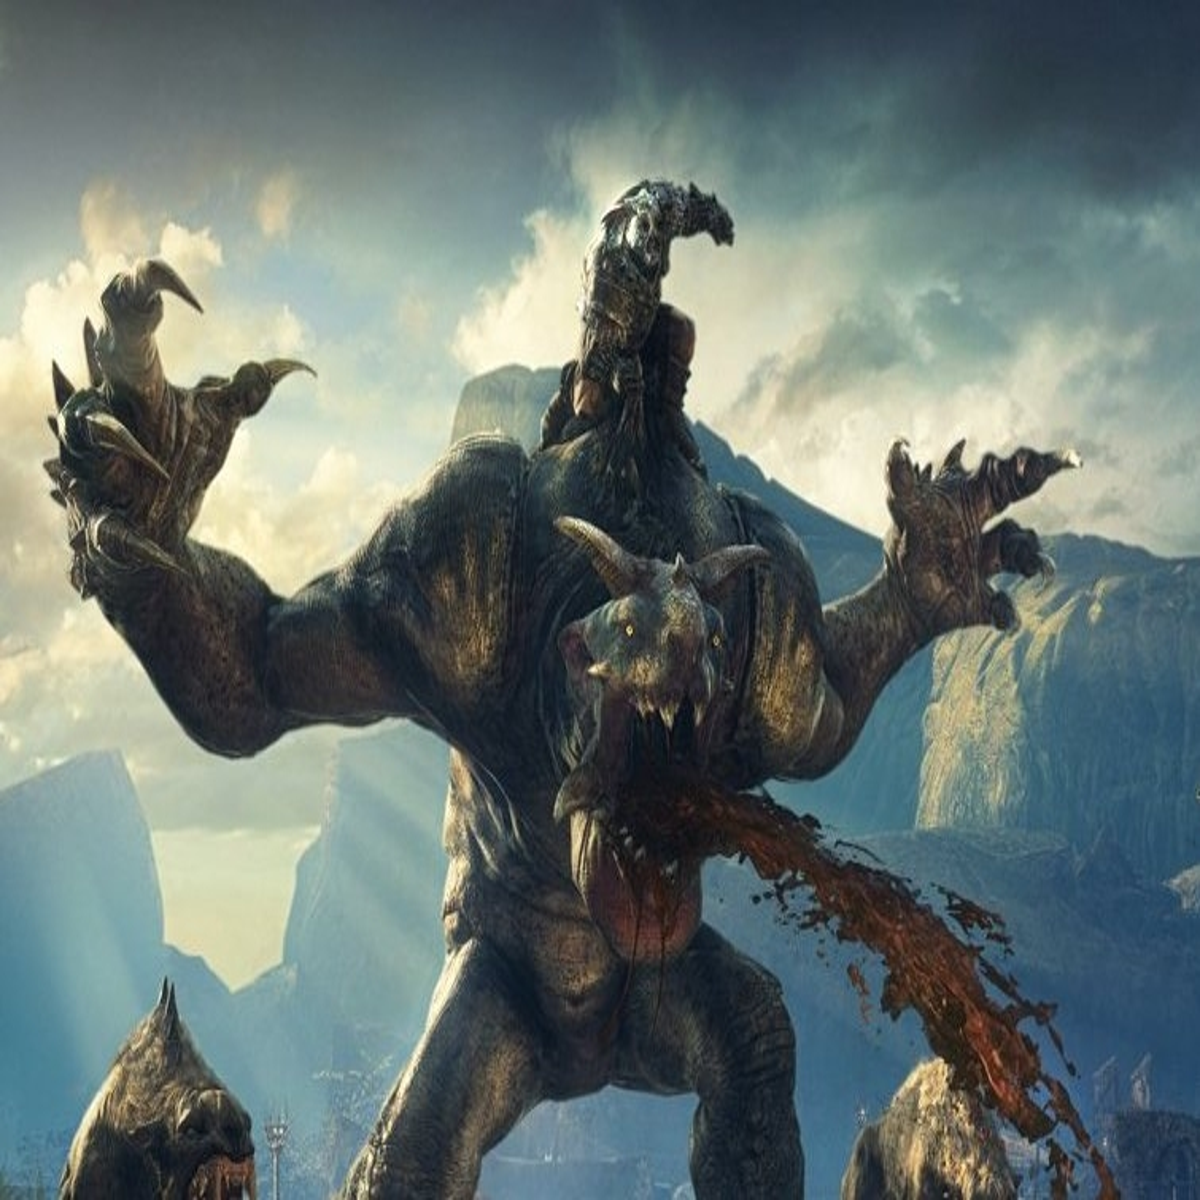 Middle-earth: Shadow of Mordor originally featured a giant, climbable beast